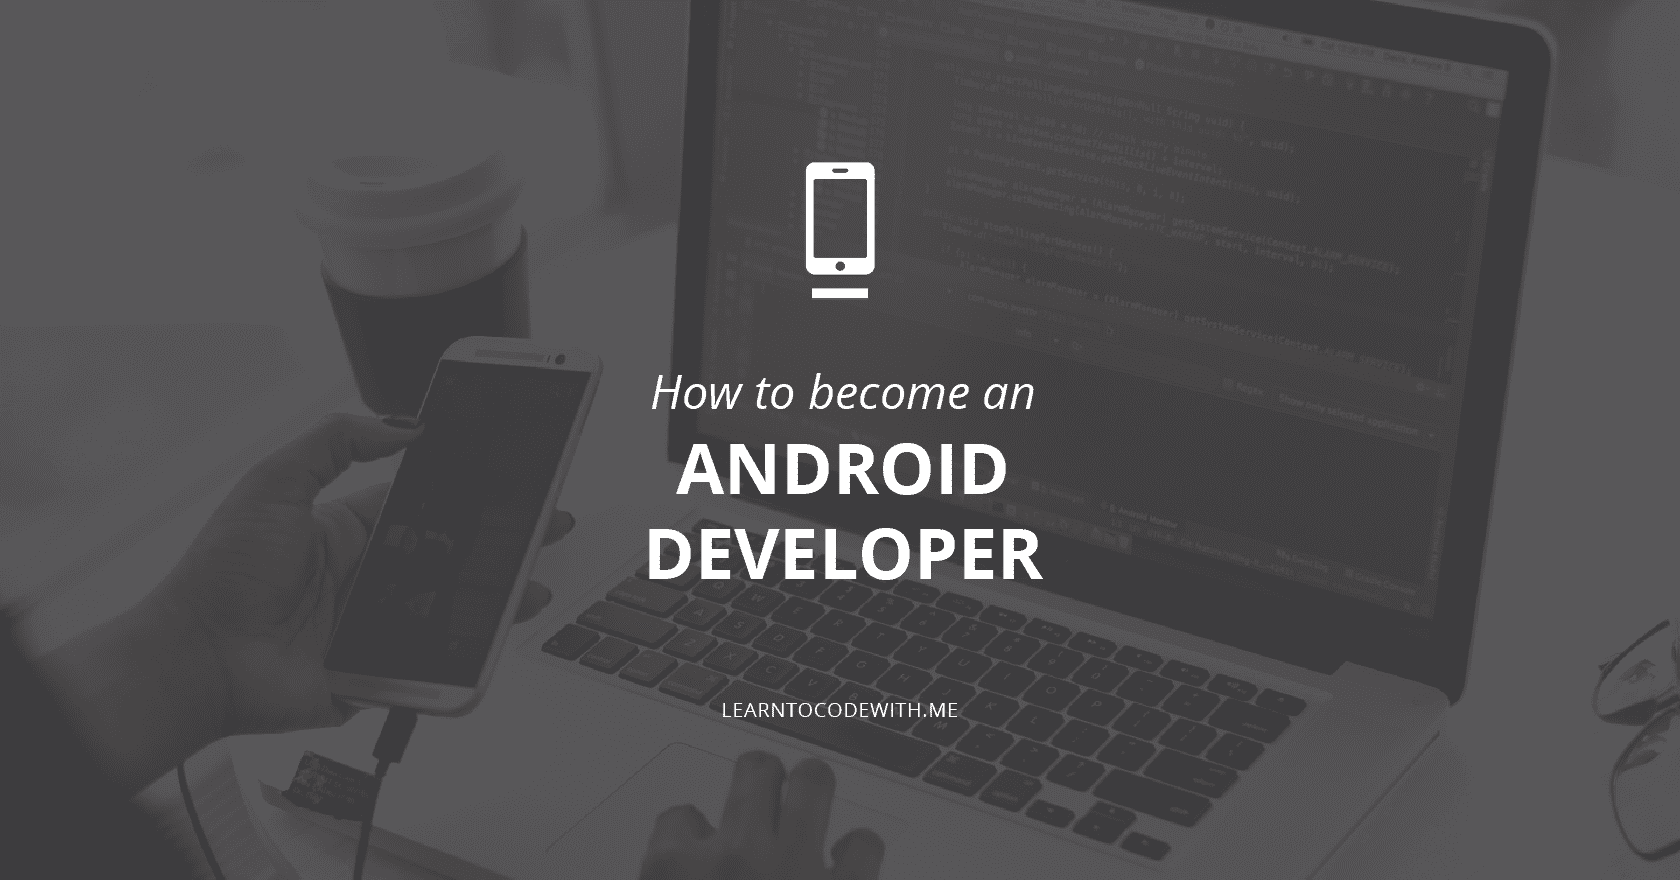 How to Become an Android Developer